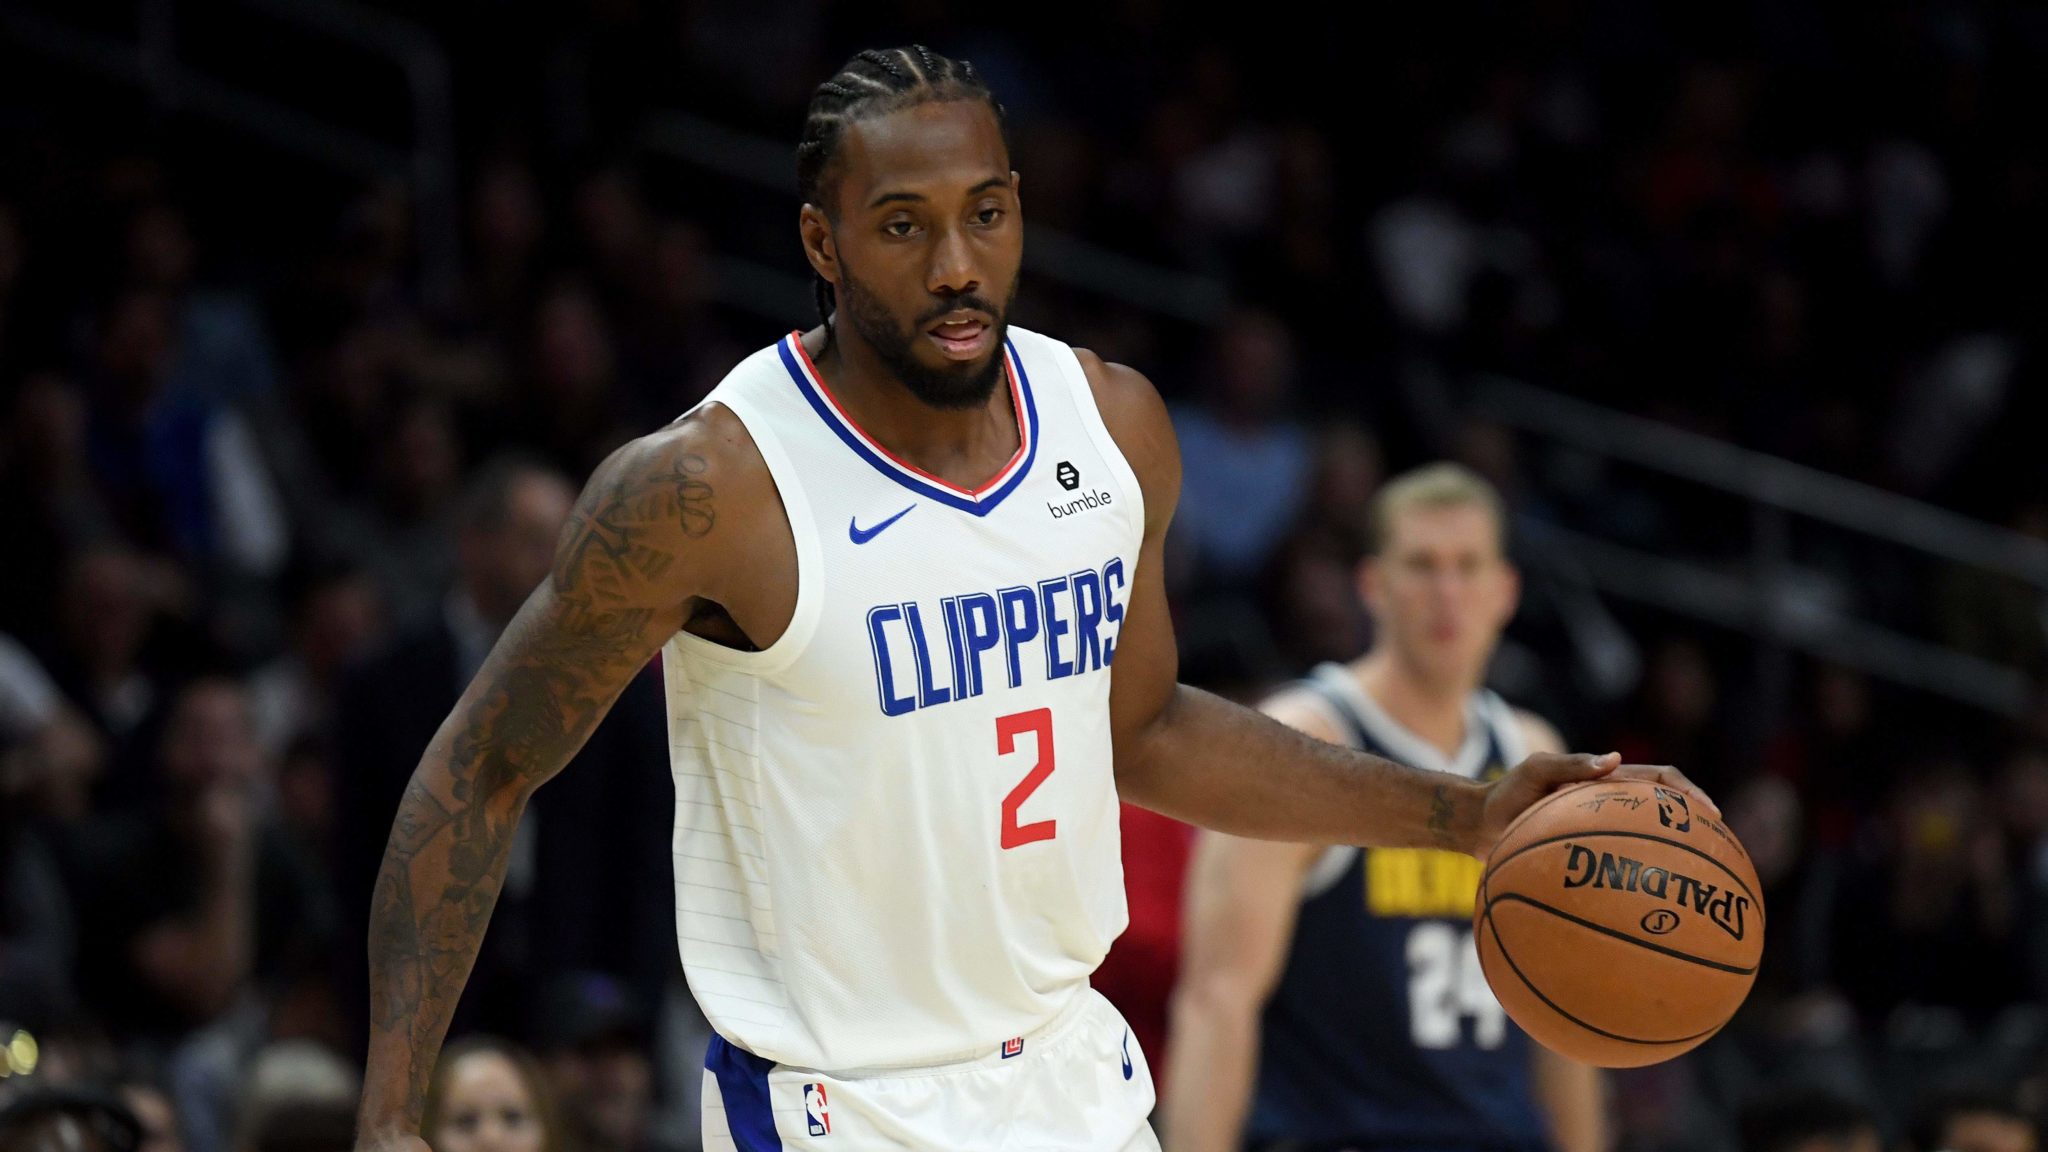 Kawhi Leonard as a member of the Clippers